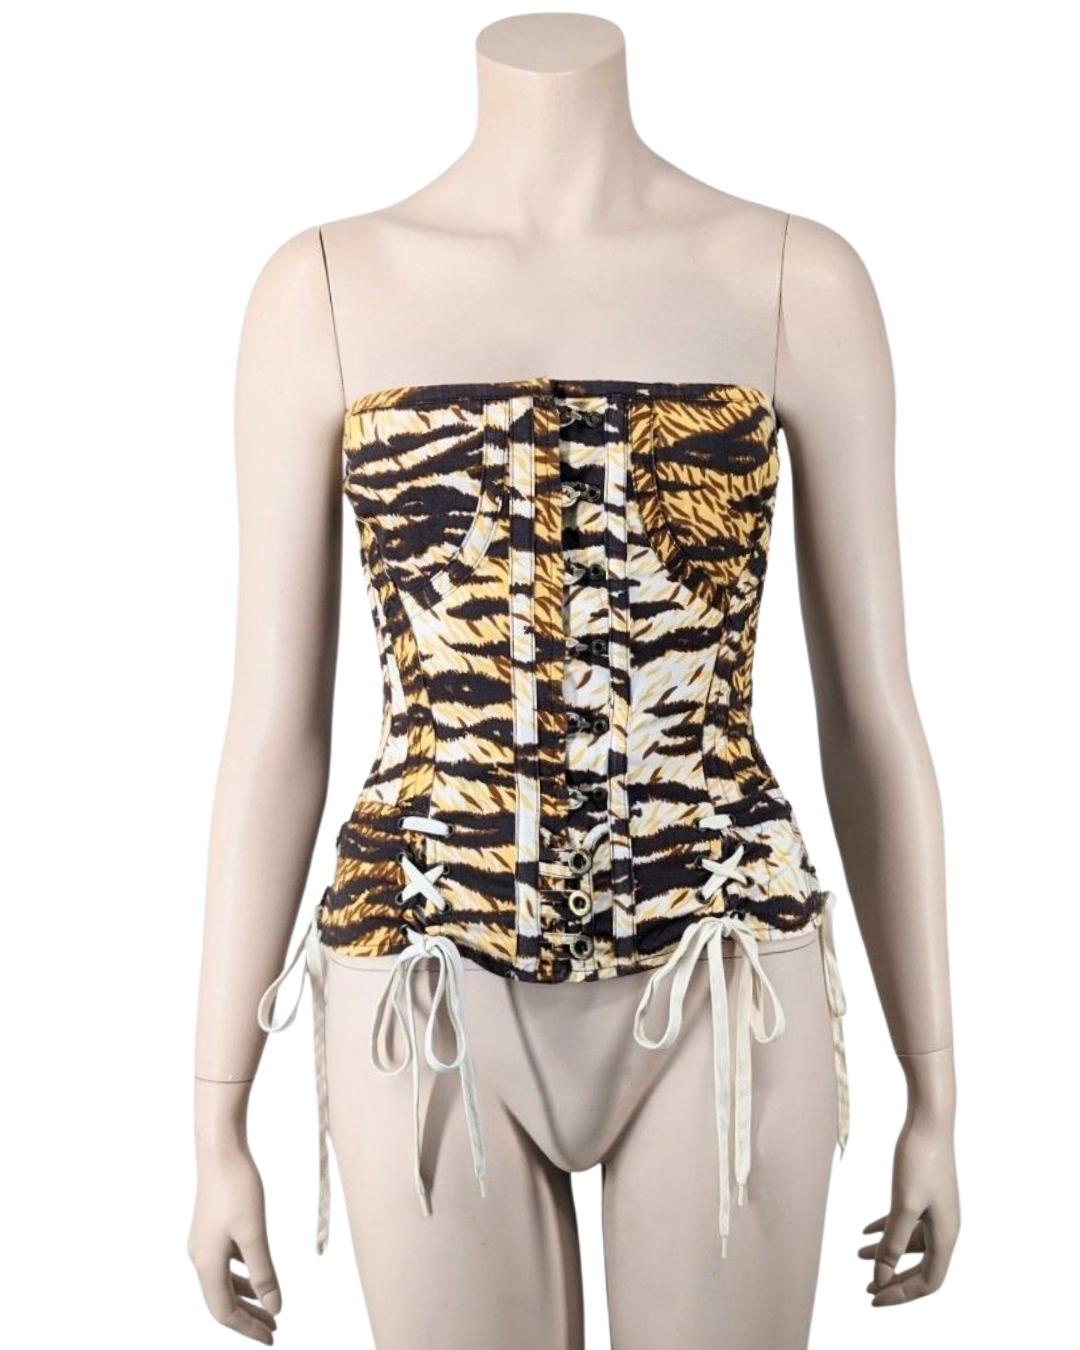 D&G by Dolce & Gabbana Animal Print Bustier For Sale 4